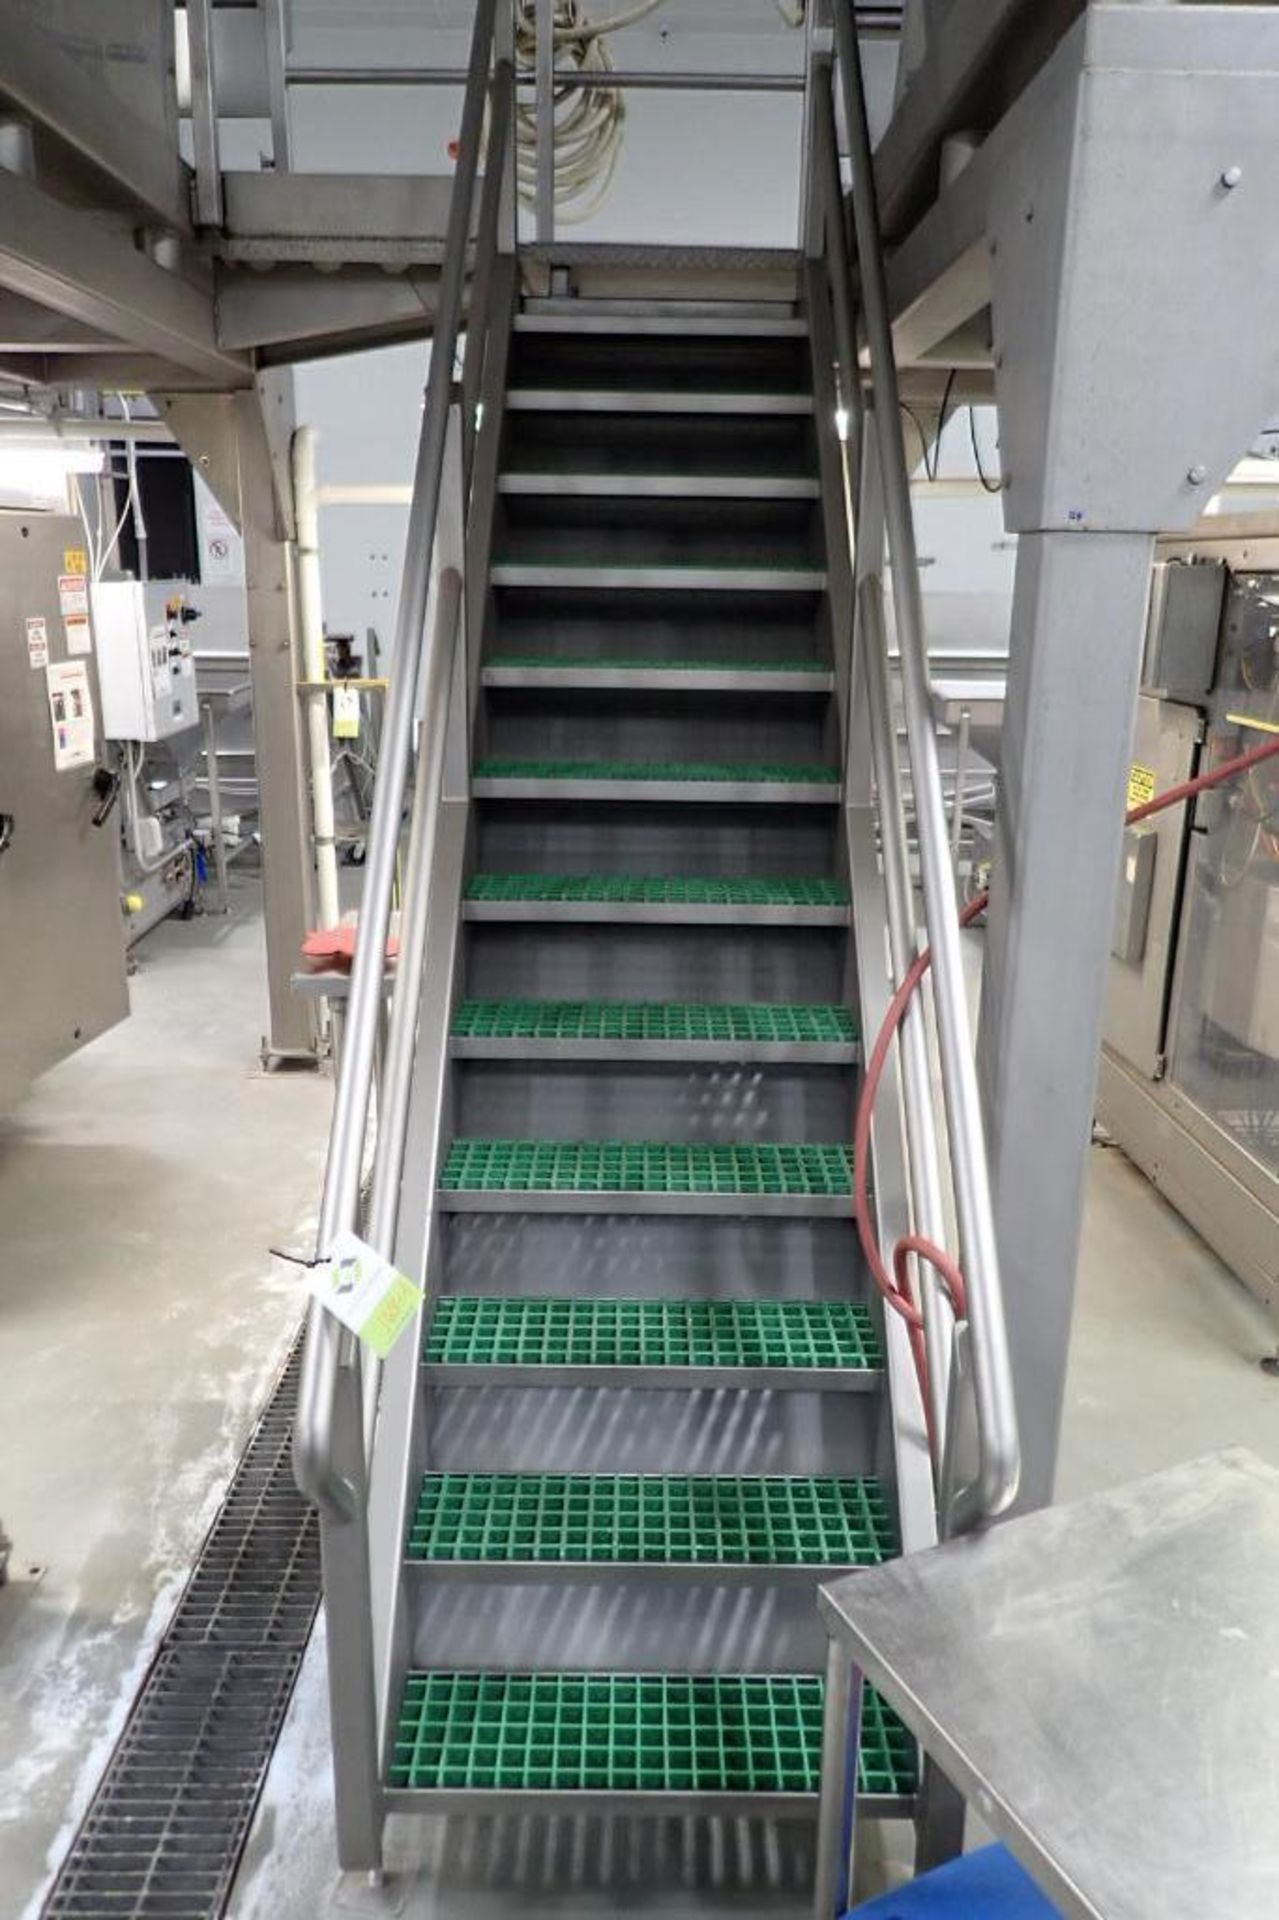 SS stairs for scale mezzanines lots 148 and 168, 12 steps, 28 in. wide - ** Rigging Fee: $ 1200 **